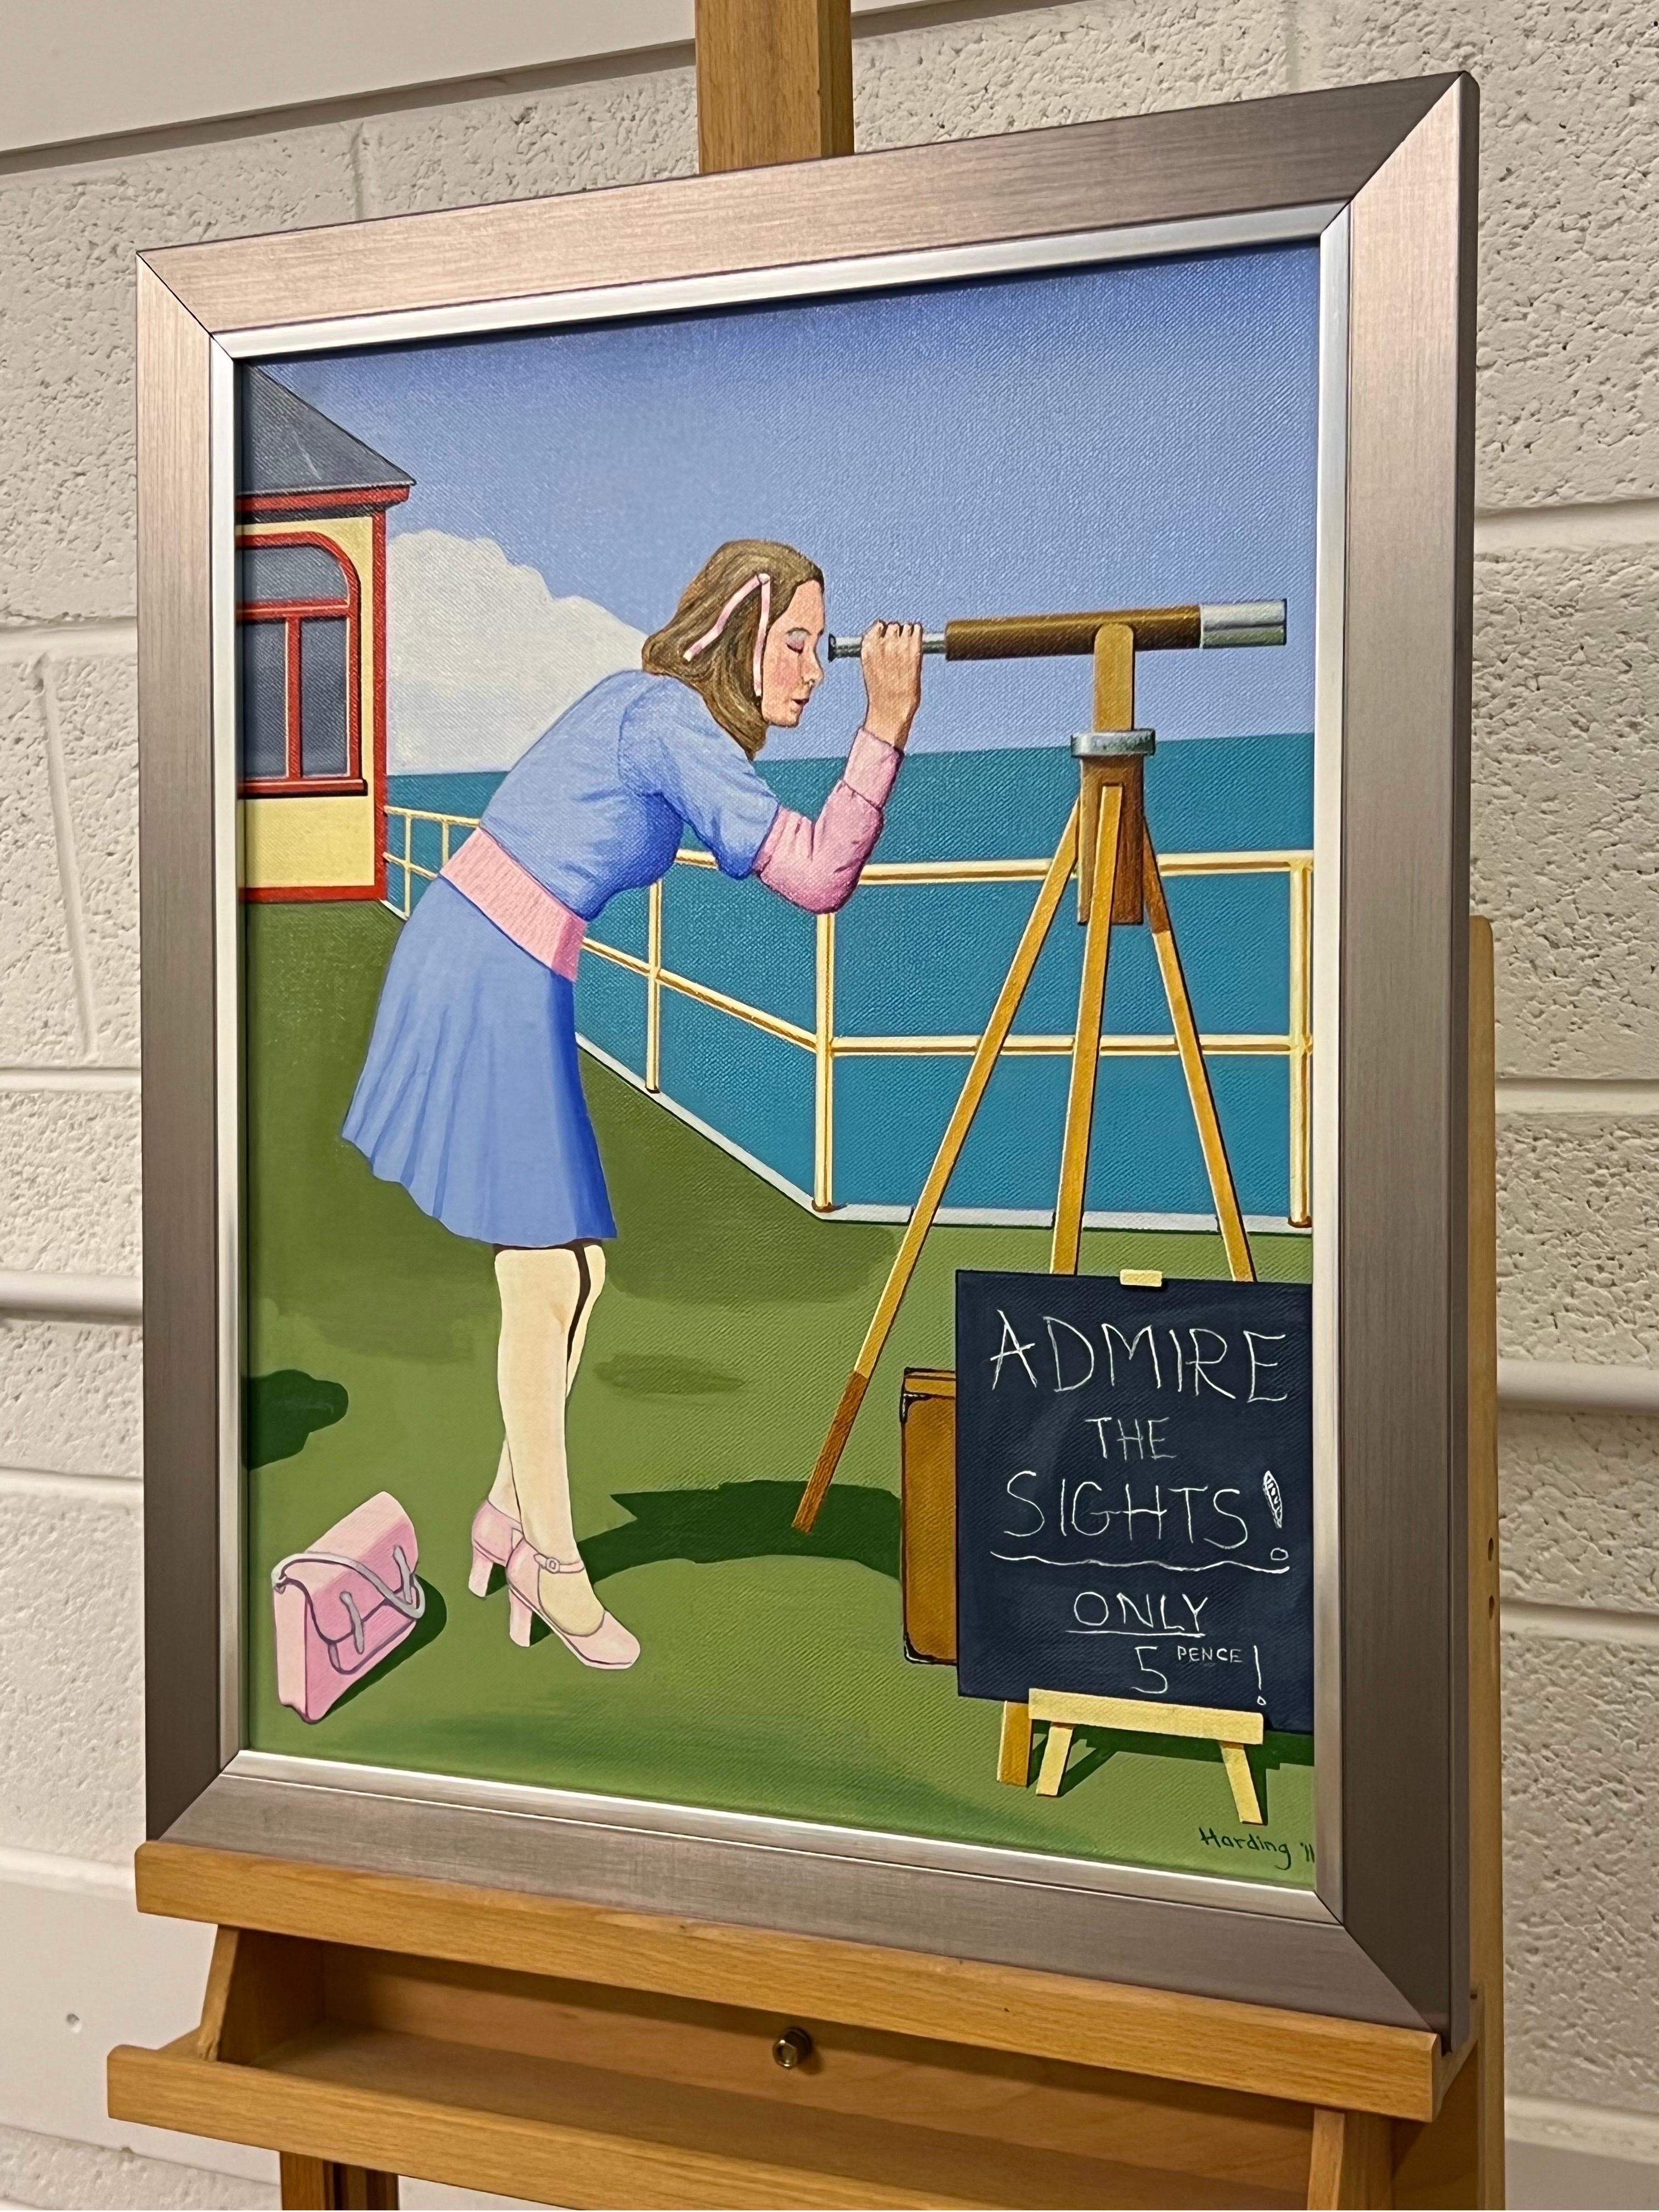 Vintage English Woman at a Seaside Beach Resort in Summer 1960's 1970's England entitled 'Seaside Delight’ by Retro Nostalgic Artist, Paul F Harding. Signed, Original, Oil on Canvas. Presented in a silver frame.

Art measures 16 x 20 inches
Frame